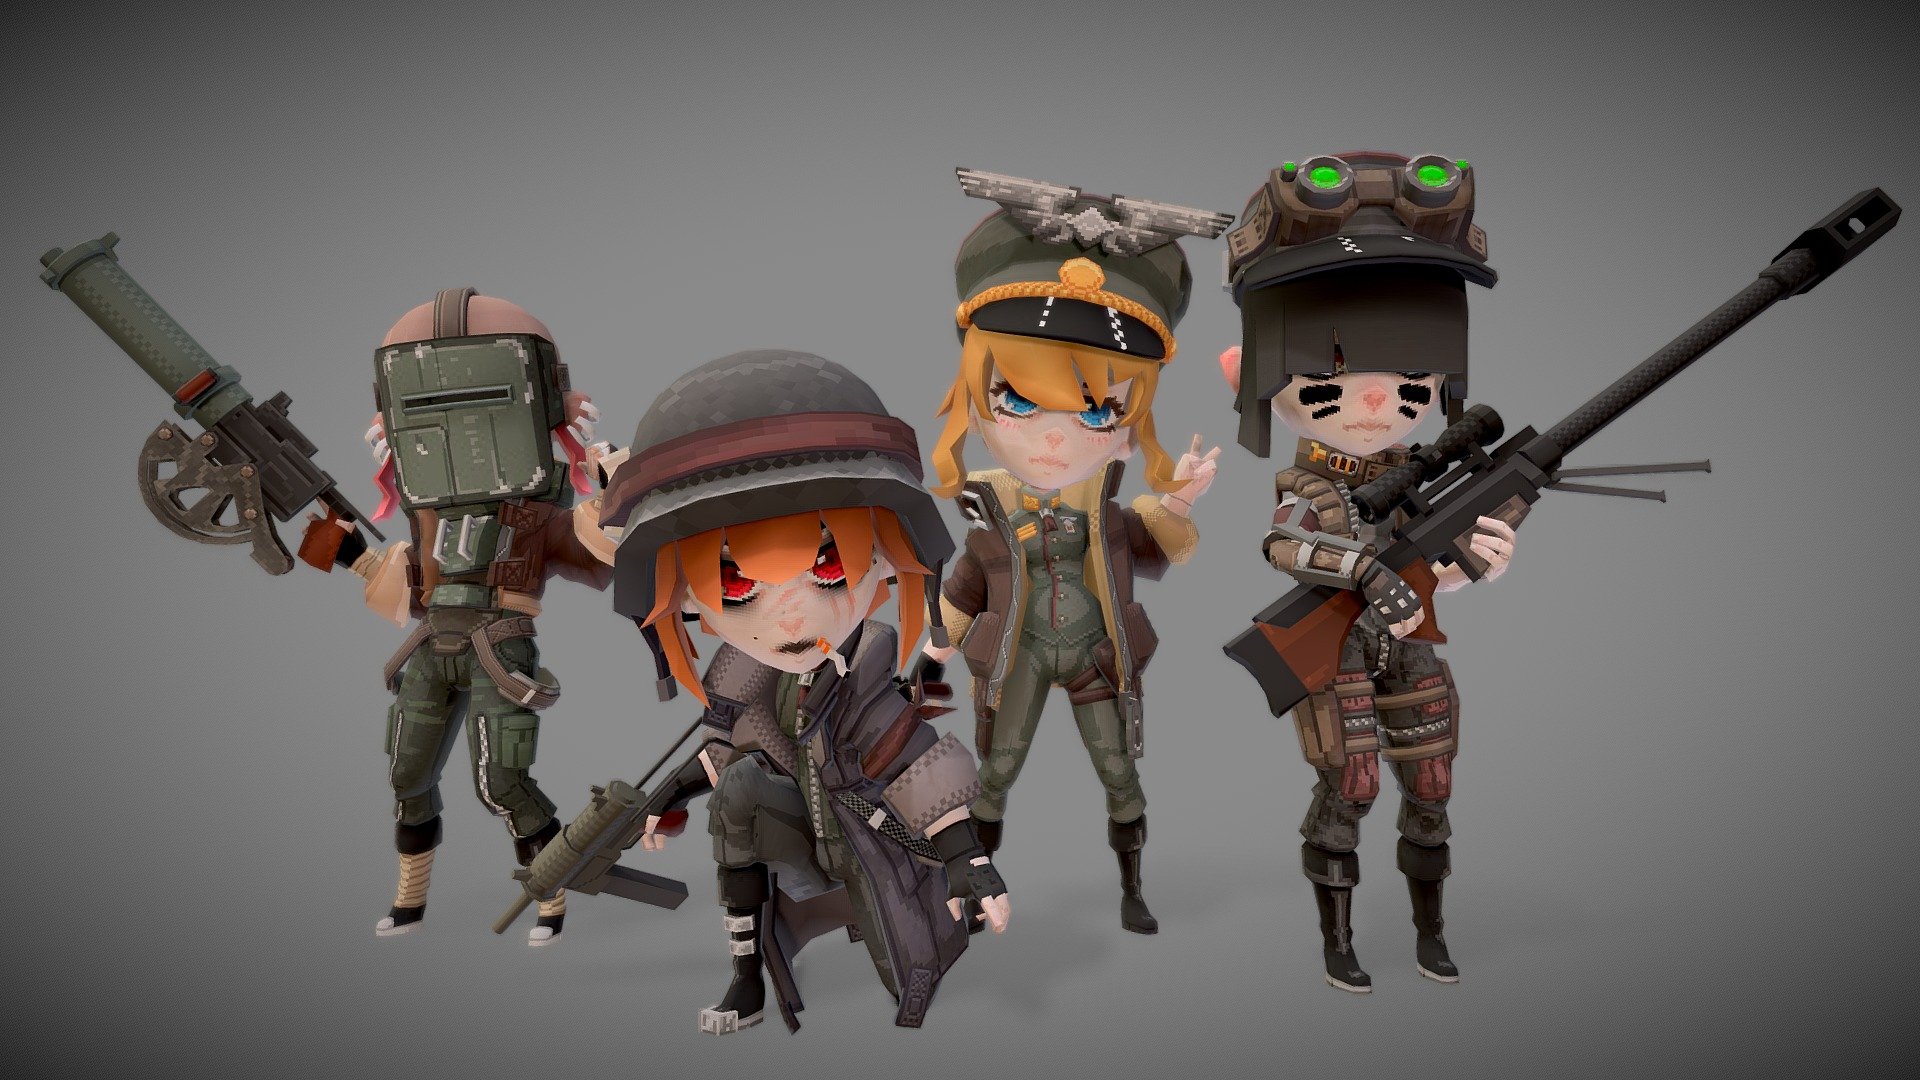 So, these were for a co-op game I was making that I never finished, I thought someone would be able to use them tho!
Four anime soldiers inspired by Tanya the Evil and similar media.

They average 4k tris each with removable jackets and helmets.
Textures are 256px, mostly used for the faces.
All of them use the same texture setup, so they should be fairly easy to customize.

Additional file contains the fully rigged characters and guns separately.
The rig is humanoid with some detail joints for hair, jackets and bicep muscle 3d model